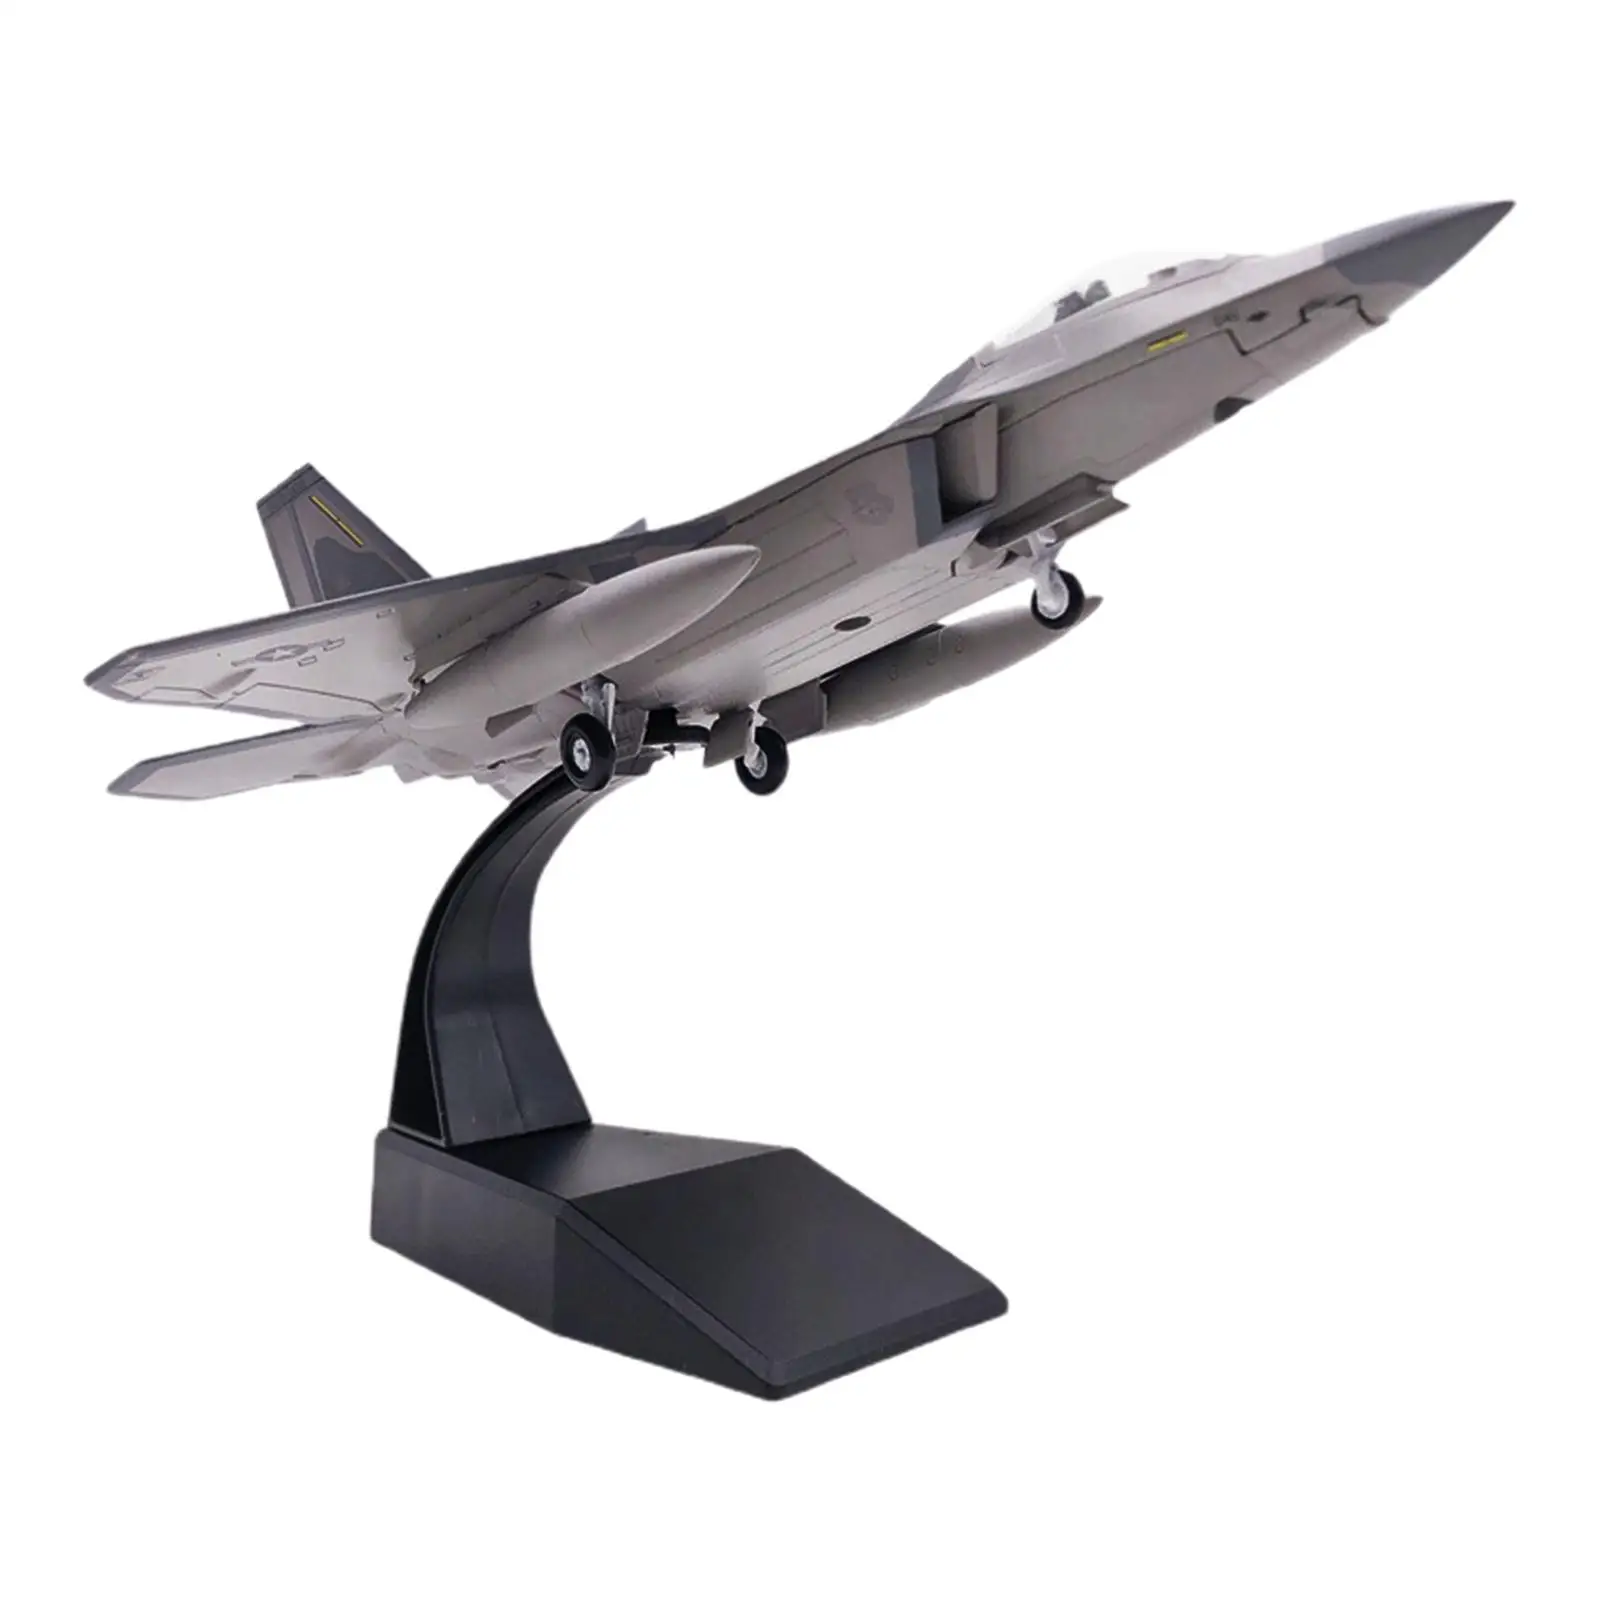 1/100 F22 Fighter Model with Stand Metal Diecast Model Plane Collection Gift